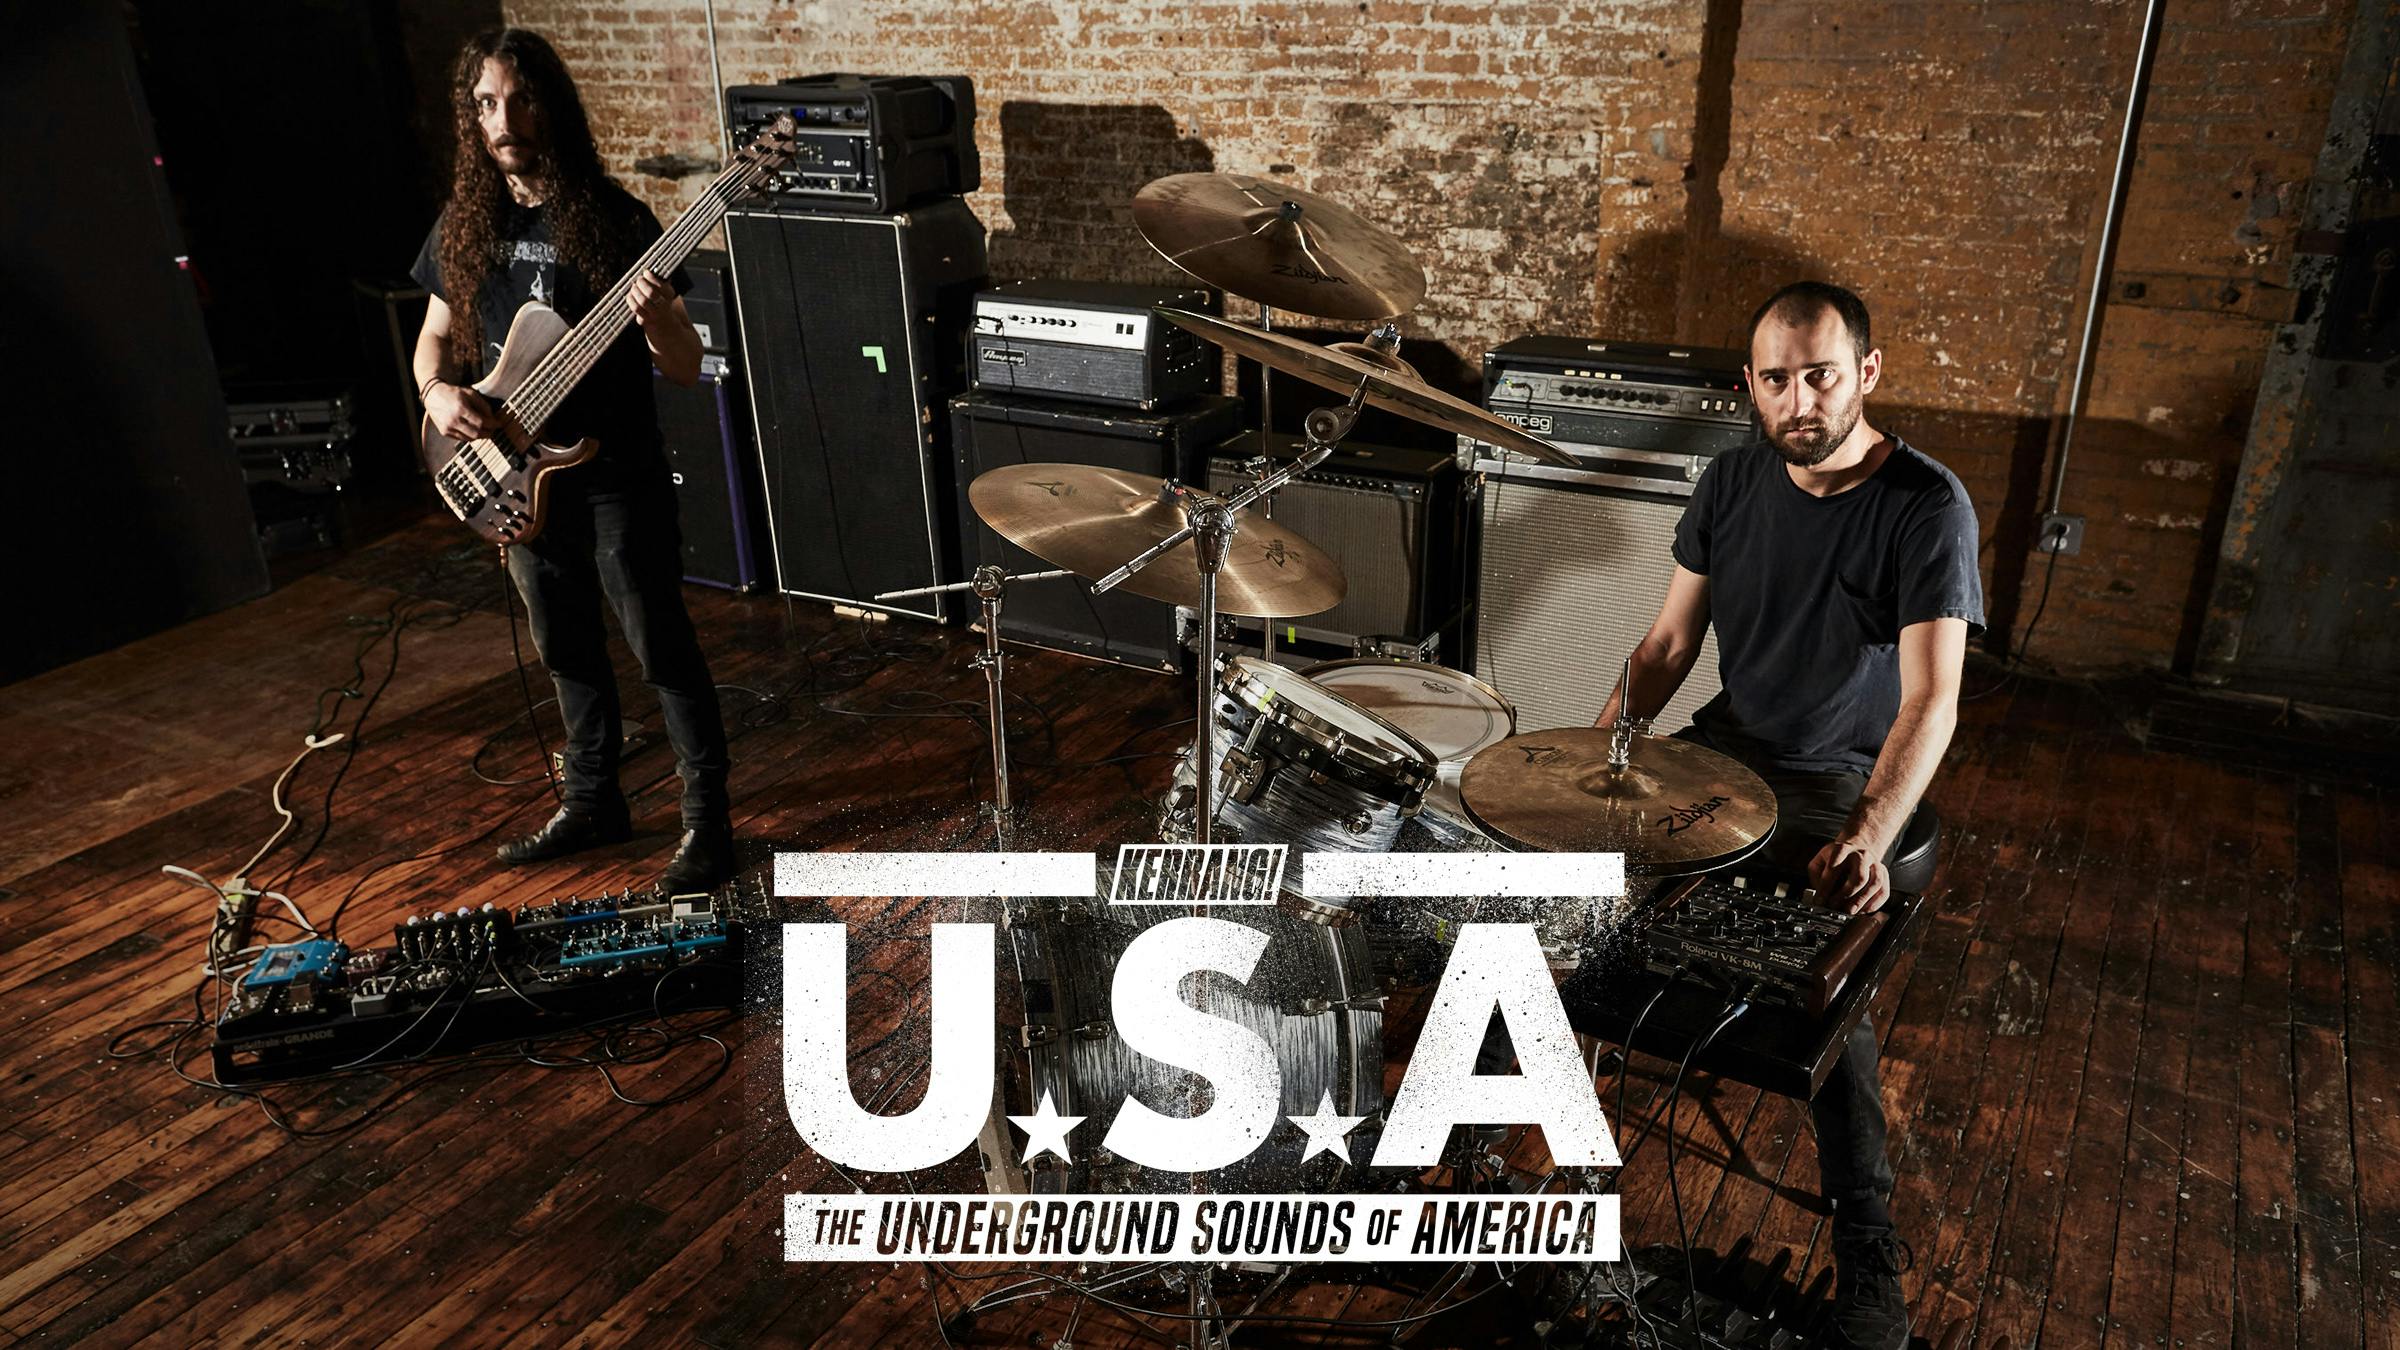 The Underground Sounds of America: Bell Witch